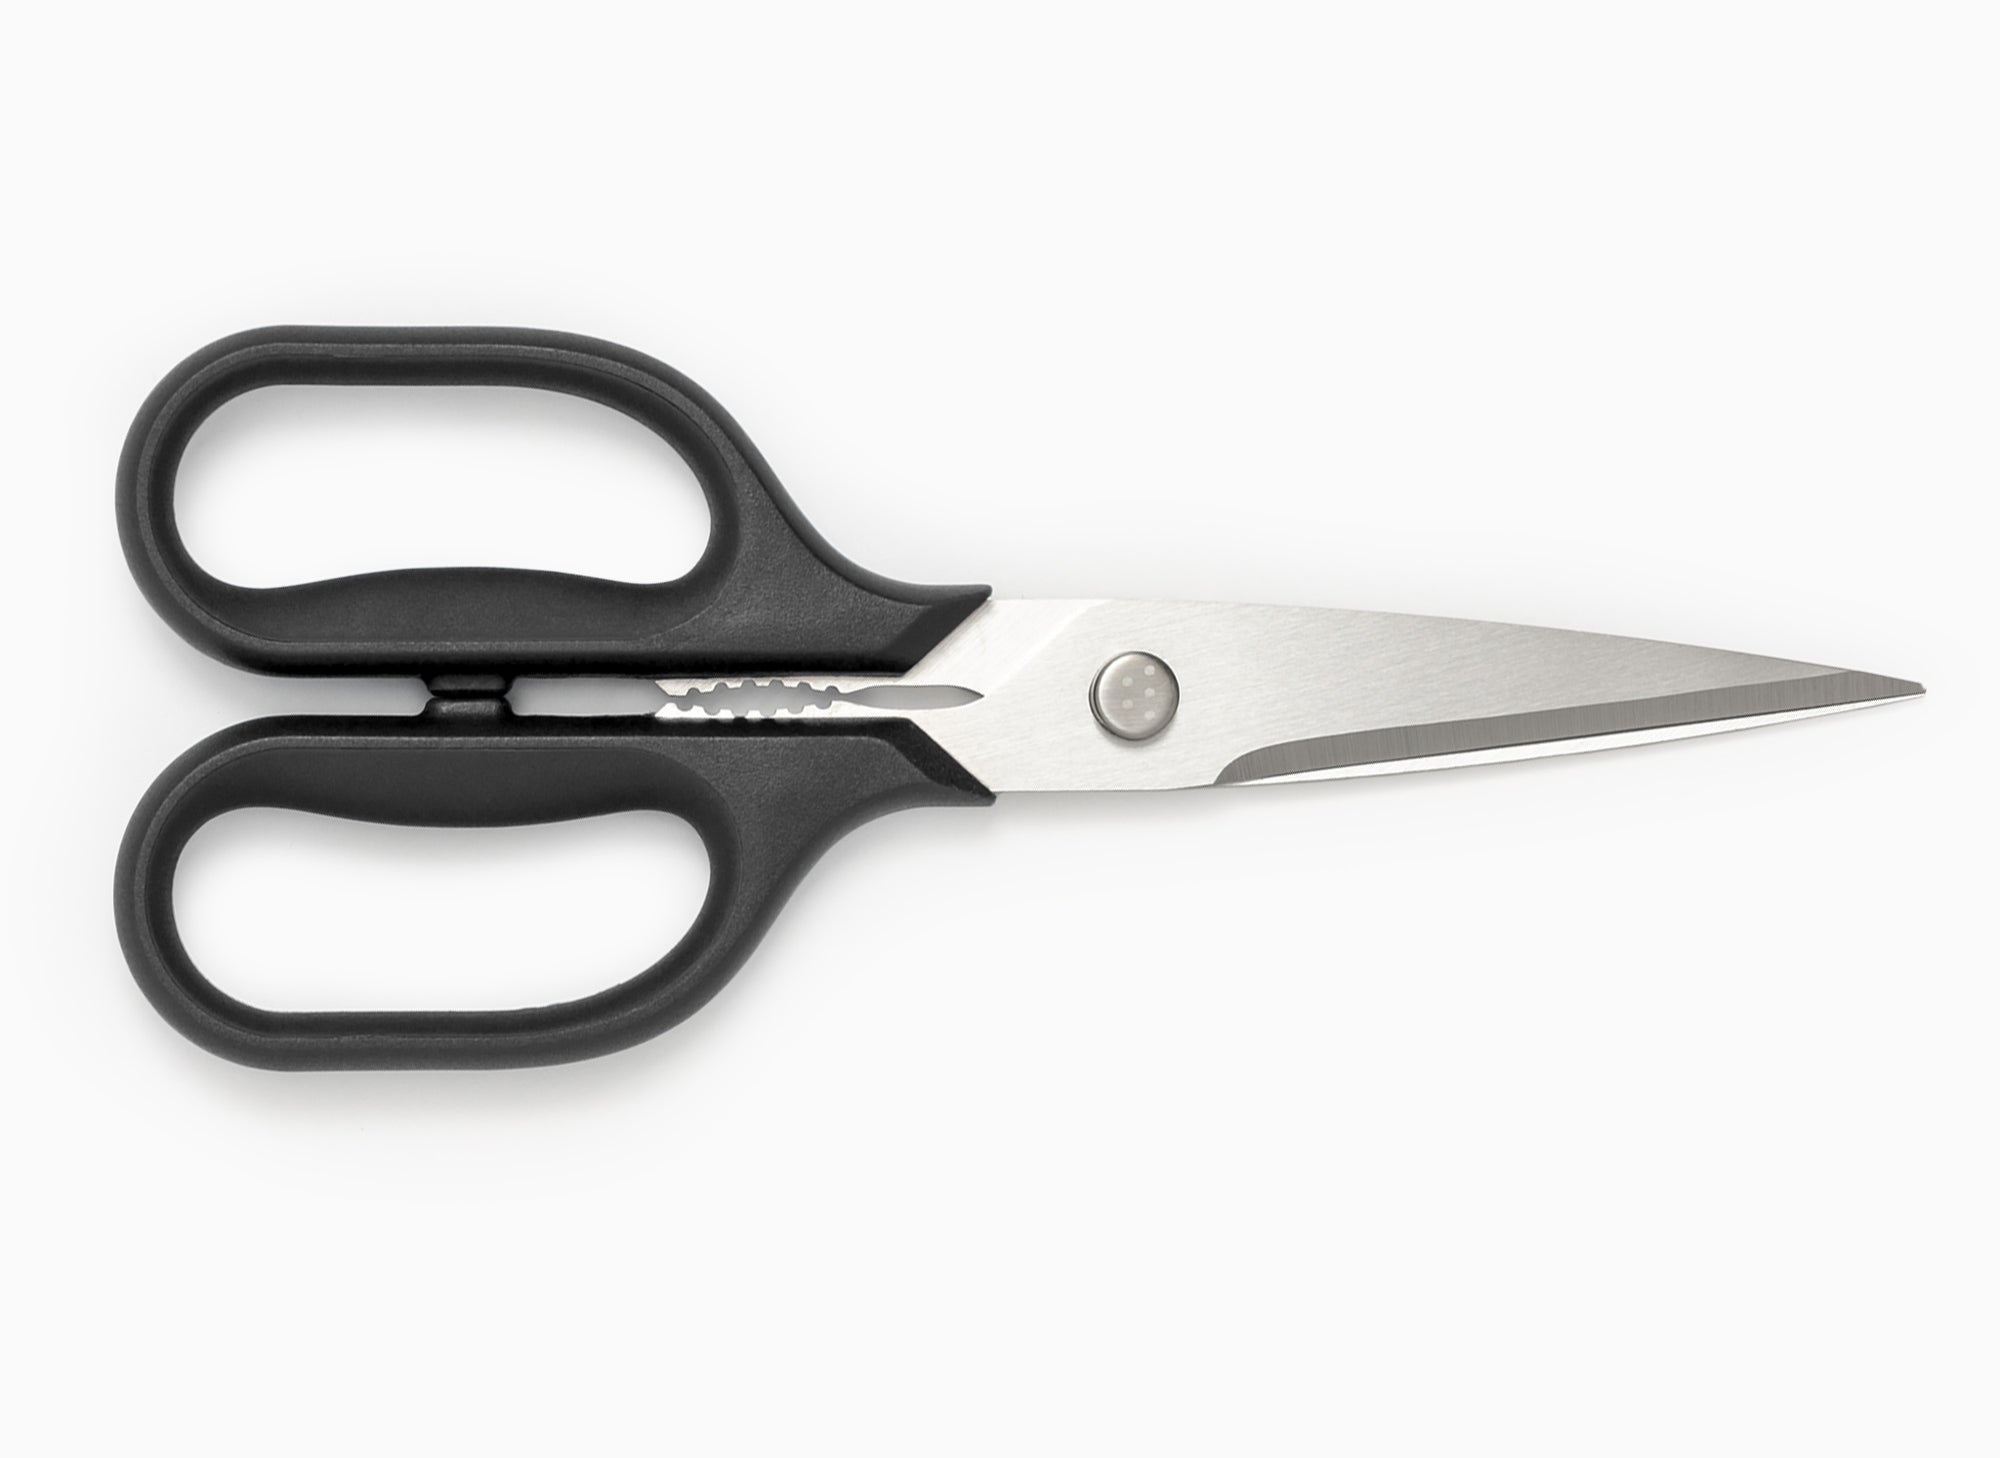 Choice 3 3/4 Stainless Steel All-Purpose Kitchen Shears with